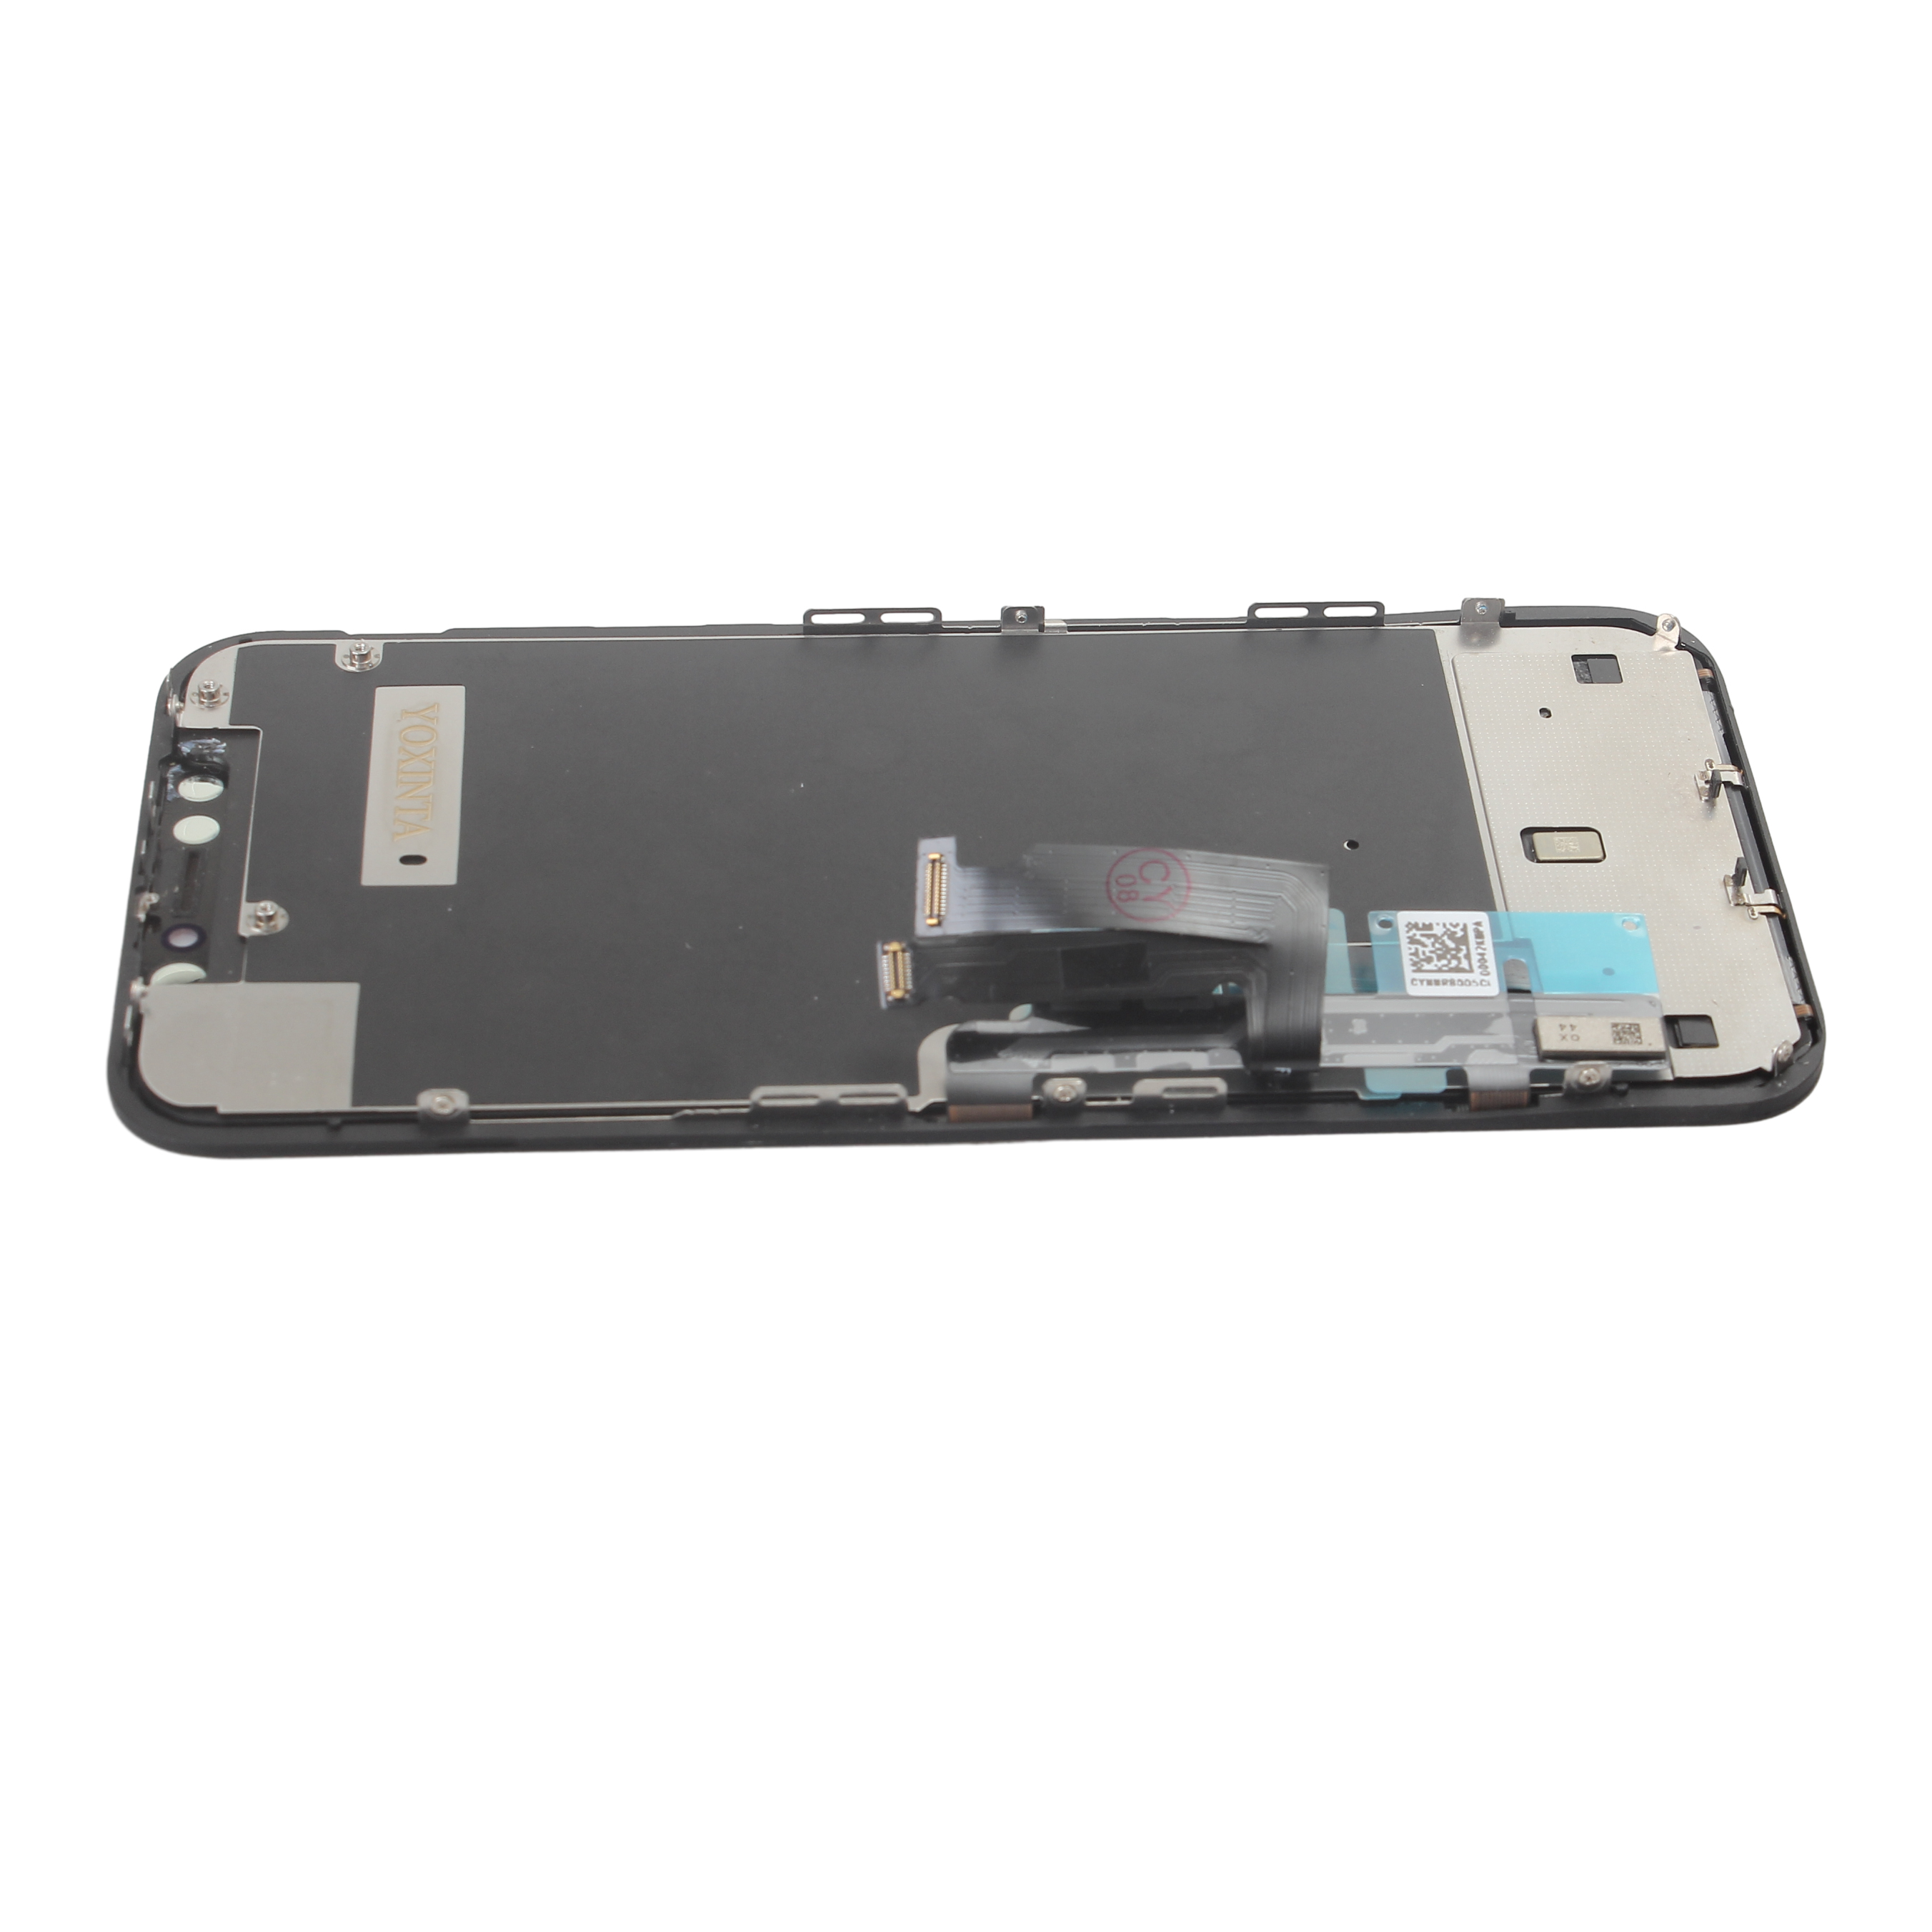 YOXINTA 6.1” 3D Touch Screen, iPhone 11 Screen Replacement LCD Display Digitizer for A2111, A2223, A2221 with Repair Tools Kit.